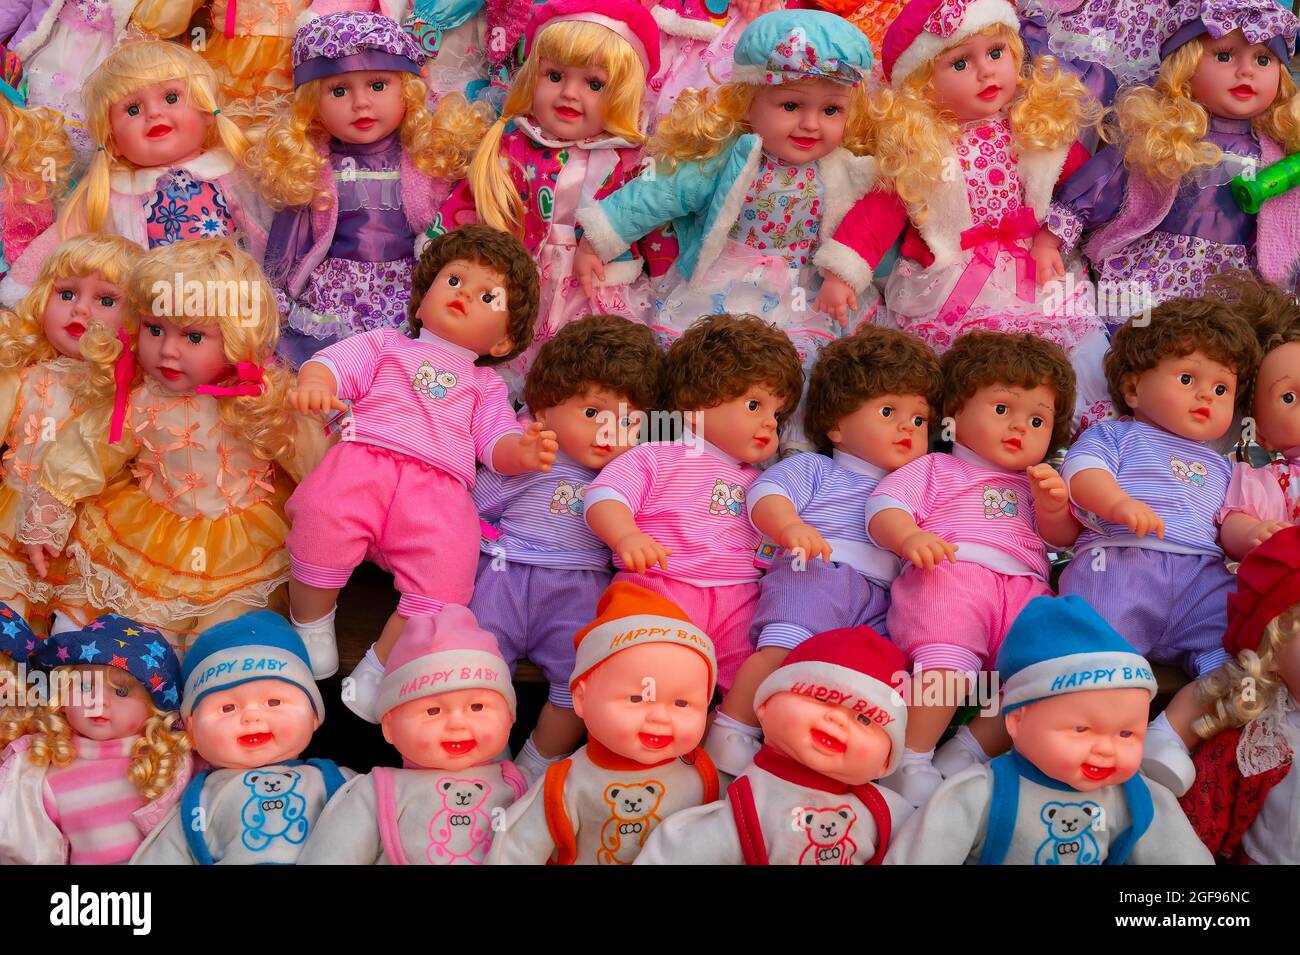 Beautiful cute baby dolls for sale at retail shop at Christmas ...